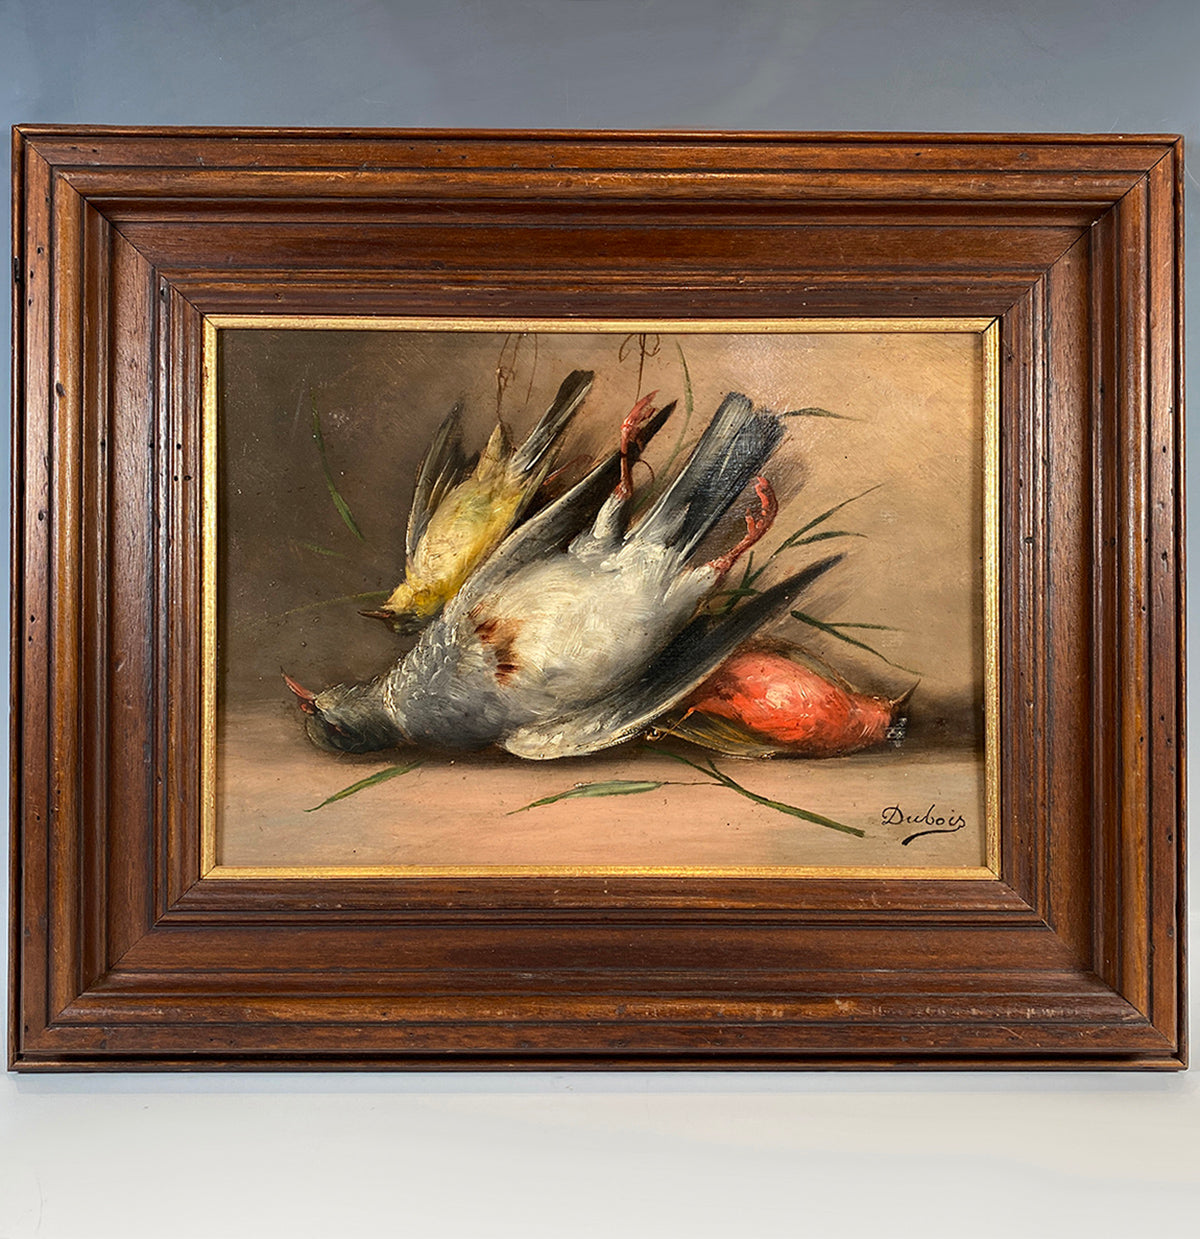 Antique to Vintage French Oil Painting Still Life of Birds "Nature Morte" Theme, Signed by Artist